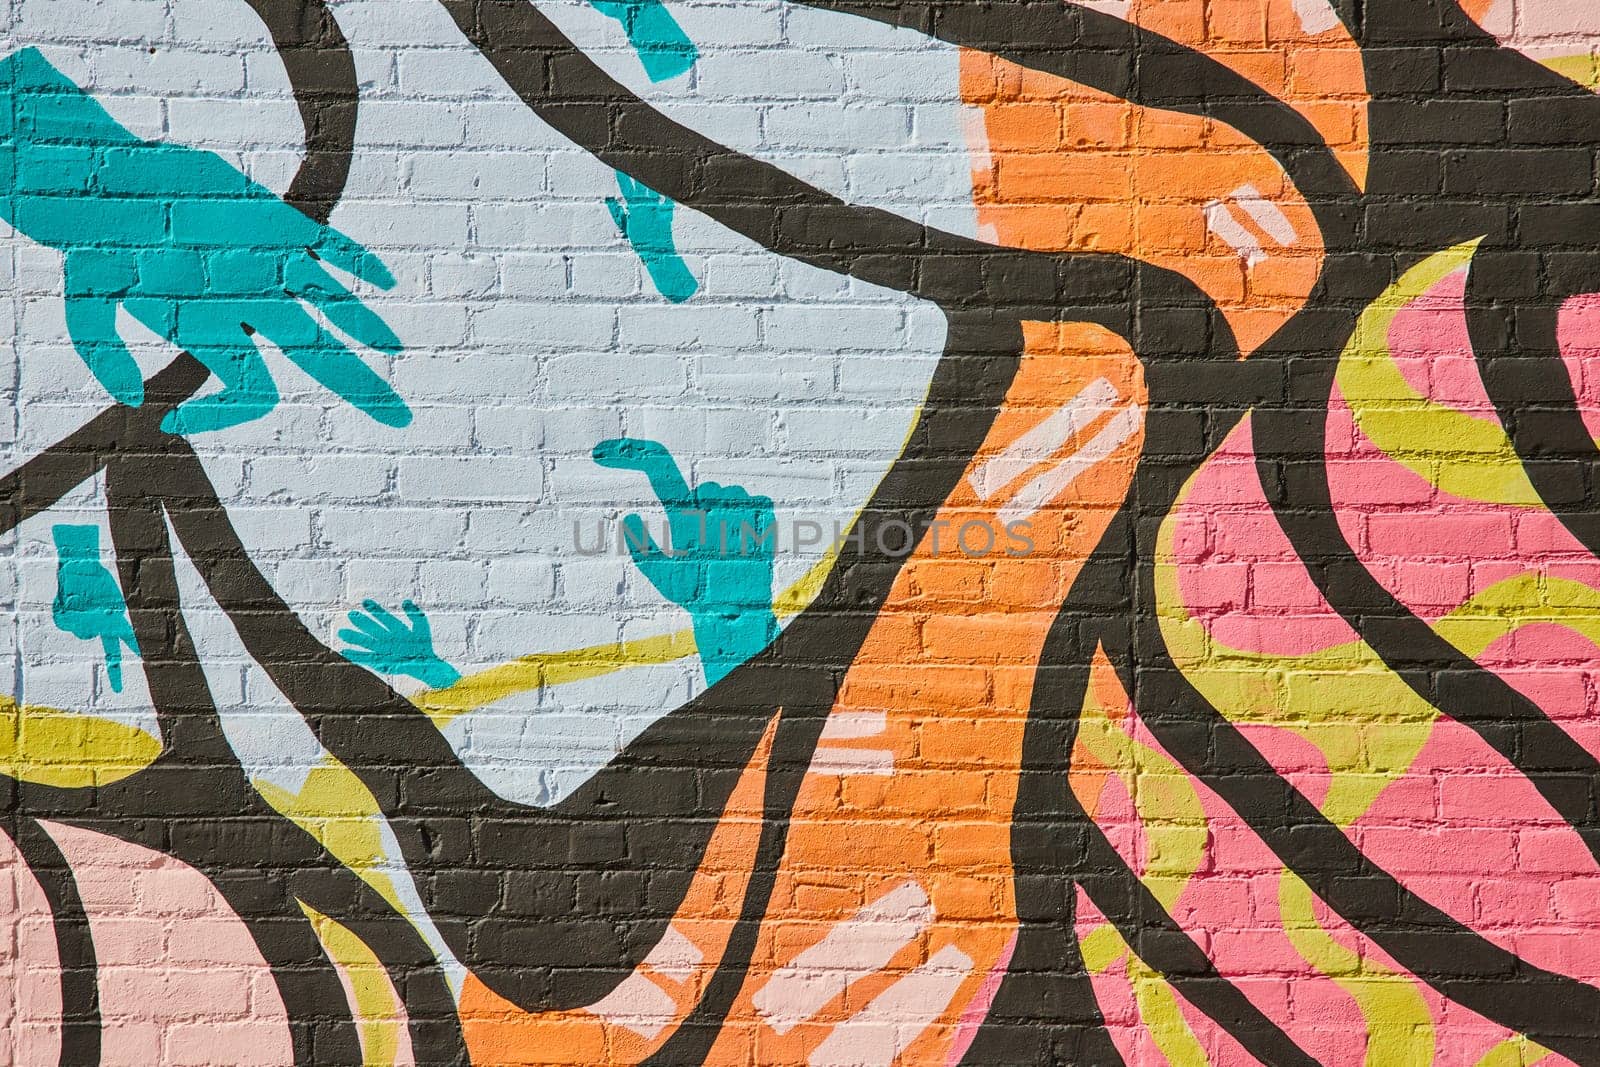 Colorful Abstract Hands Mural on Brick Wall, Urban Street Art by njproductions